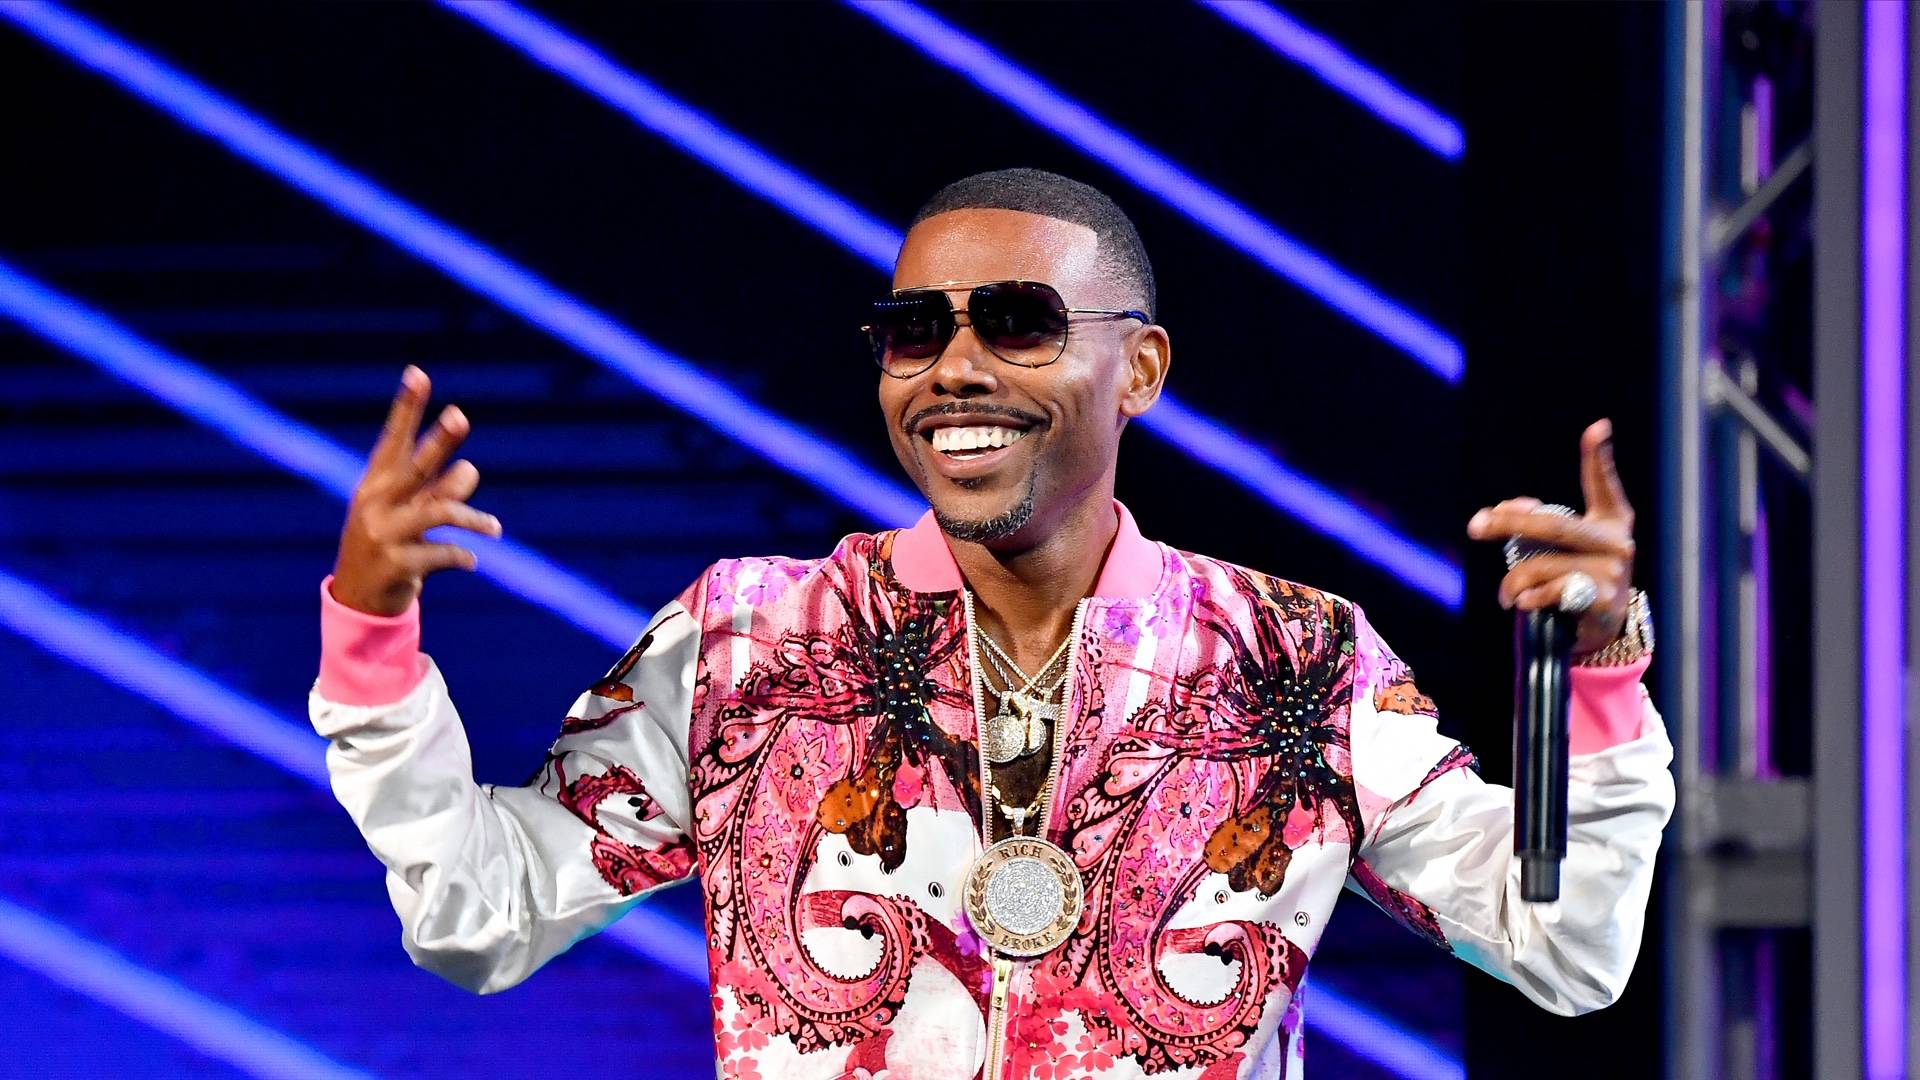 Lil Duval on BET Buzz 2020.